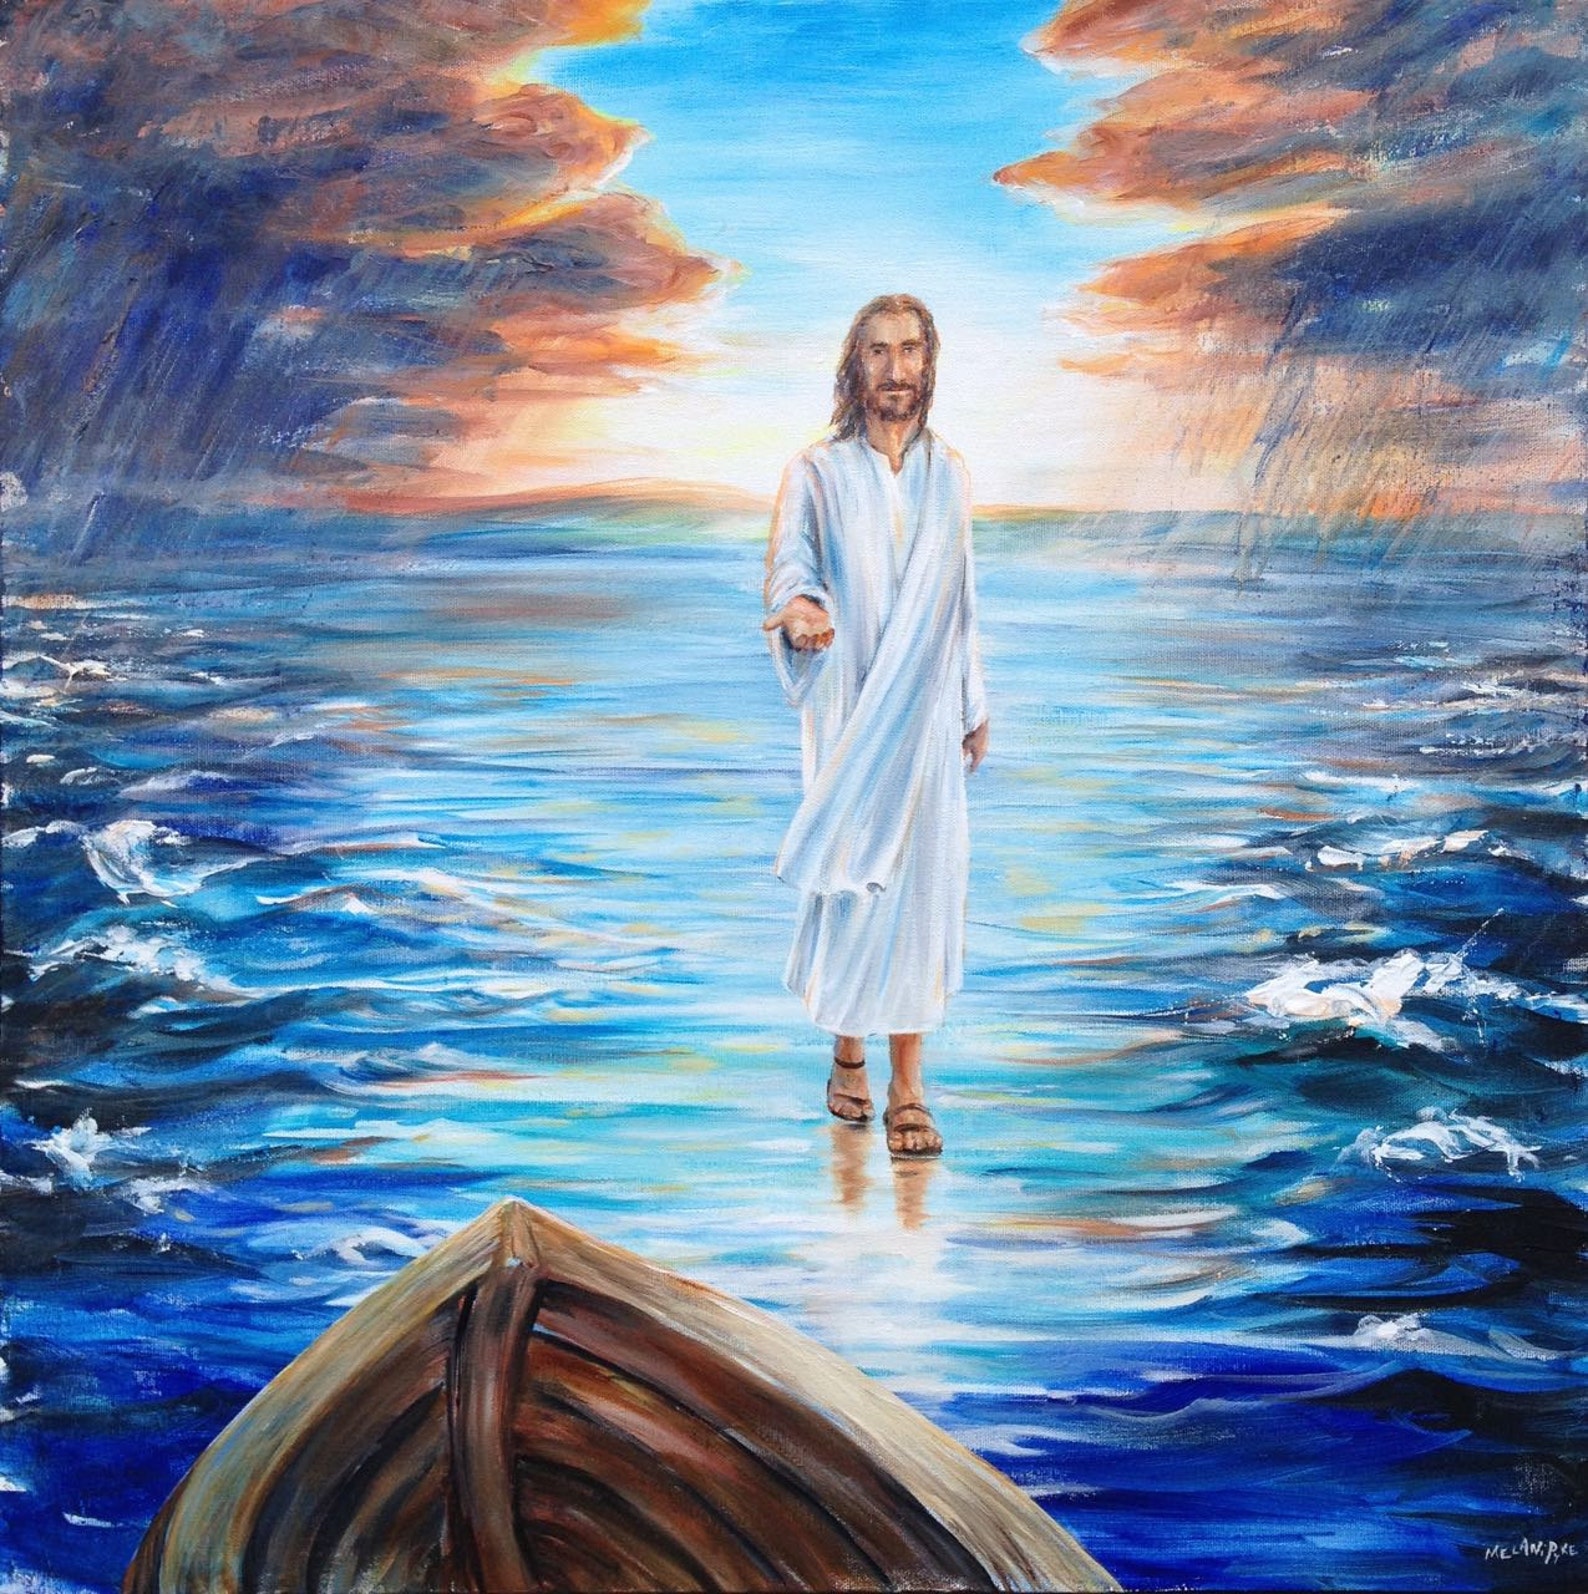 Walking On Water Oil Painting Of Jesus Christ Inviting With Open Hand